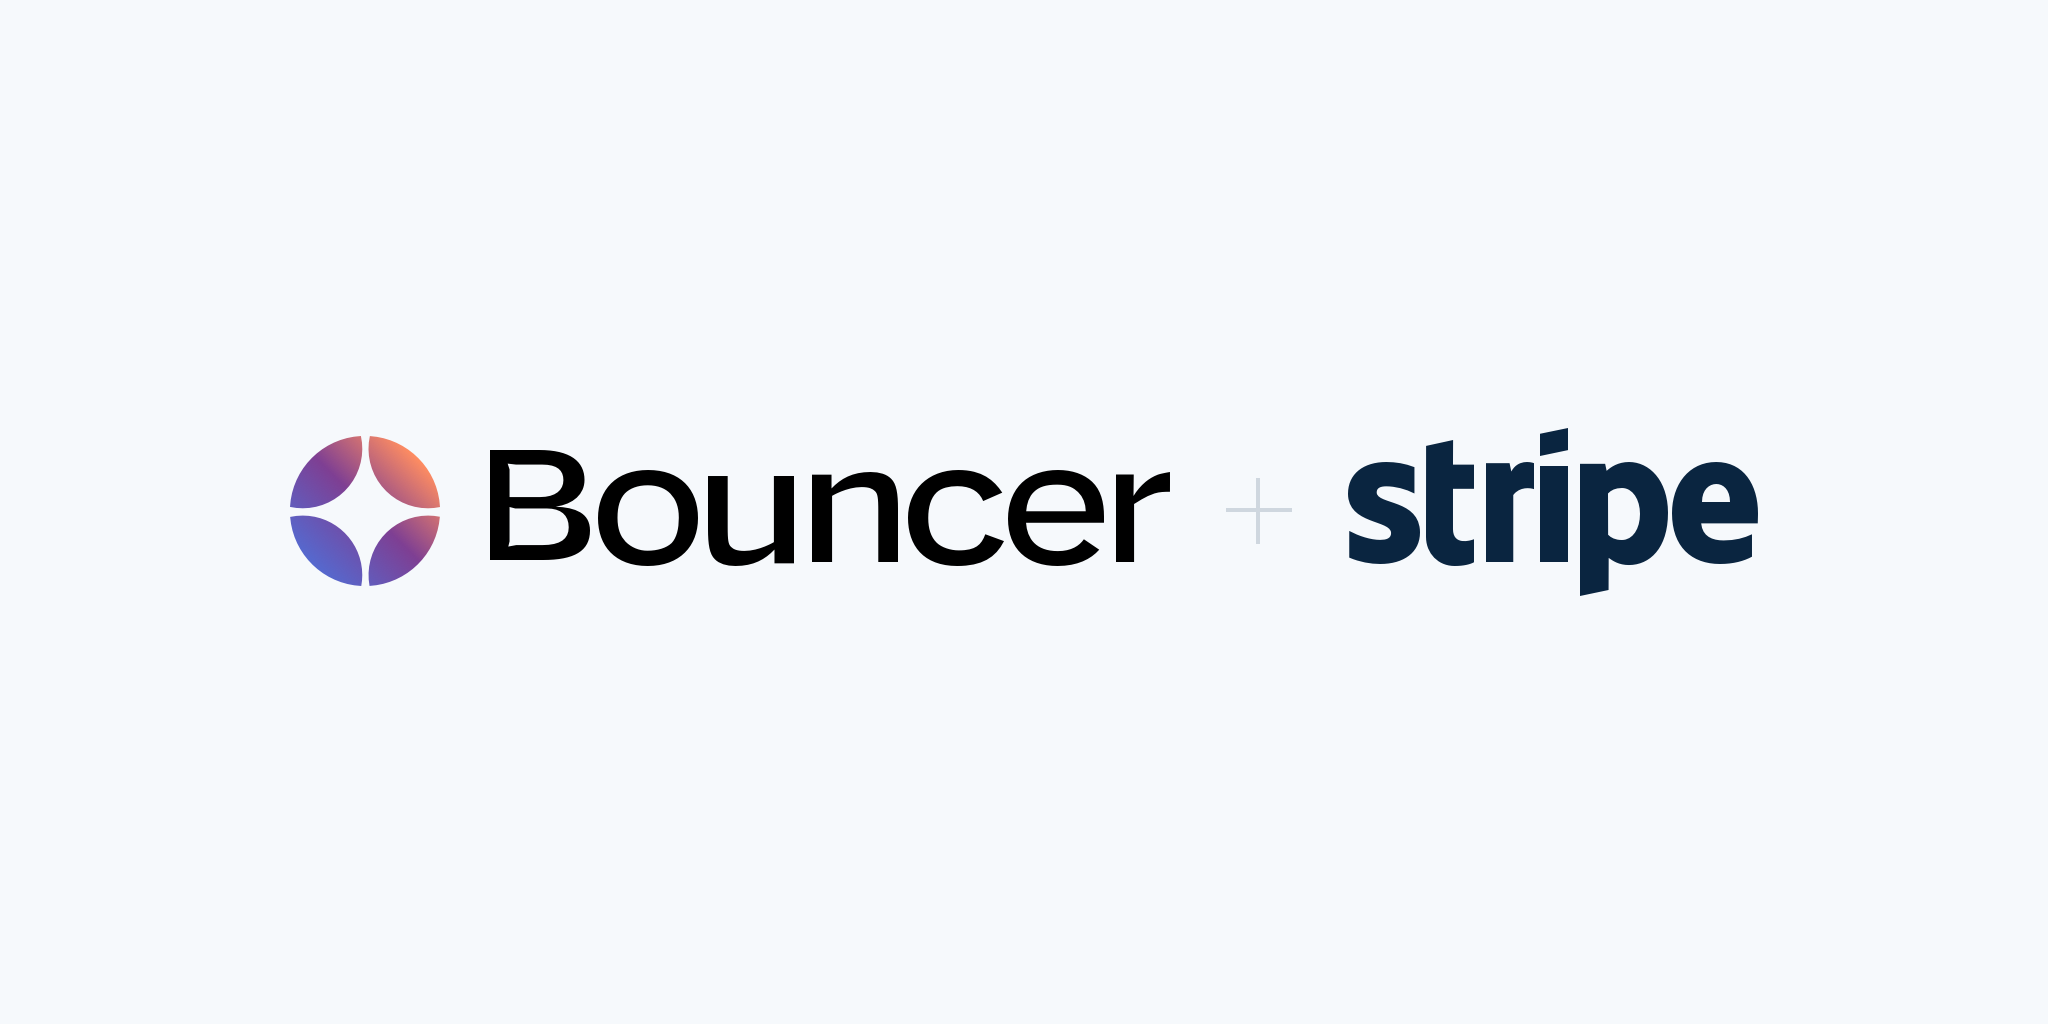 Stripe acquires Bouncer to help businesses with fraud prevention